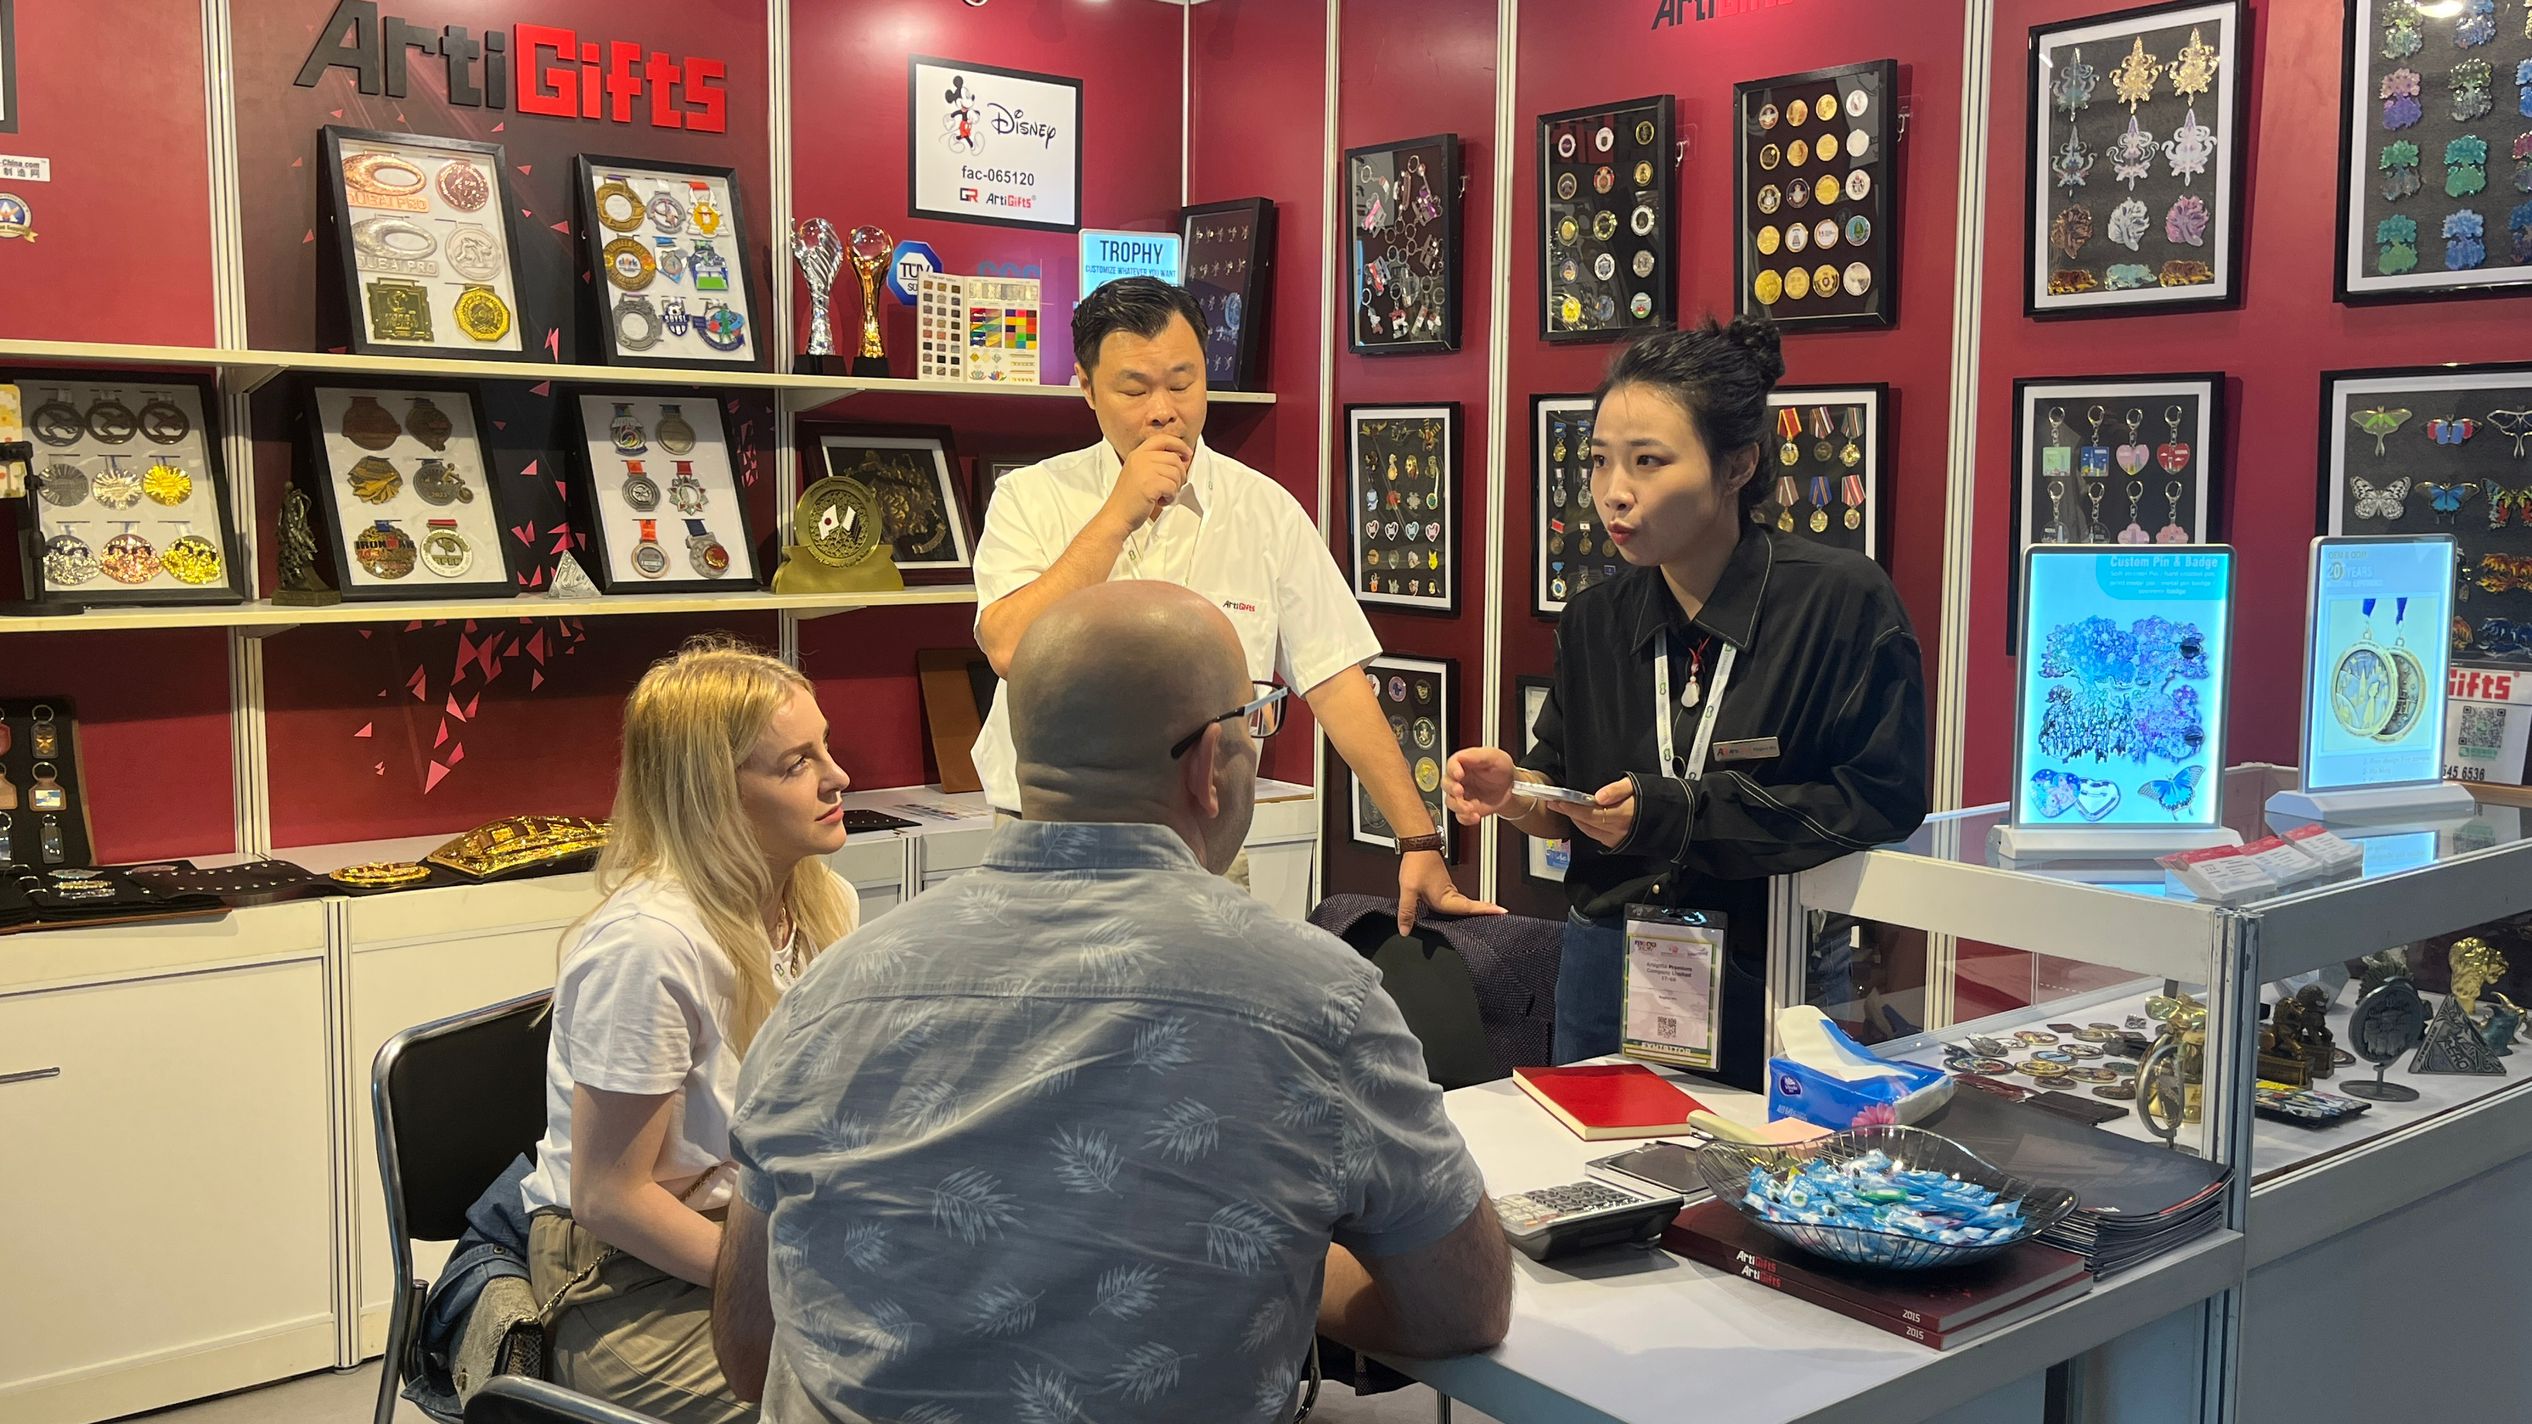 Artigiftsmedals will be happy to see old friends at the Hongkong gift international trade show in 2023  and see you again in 2024